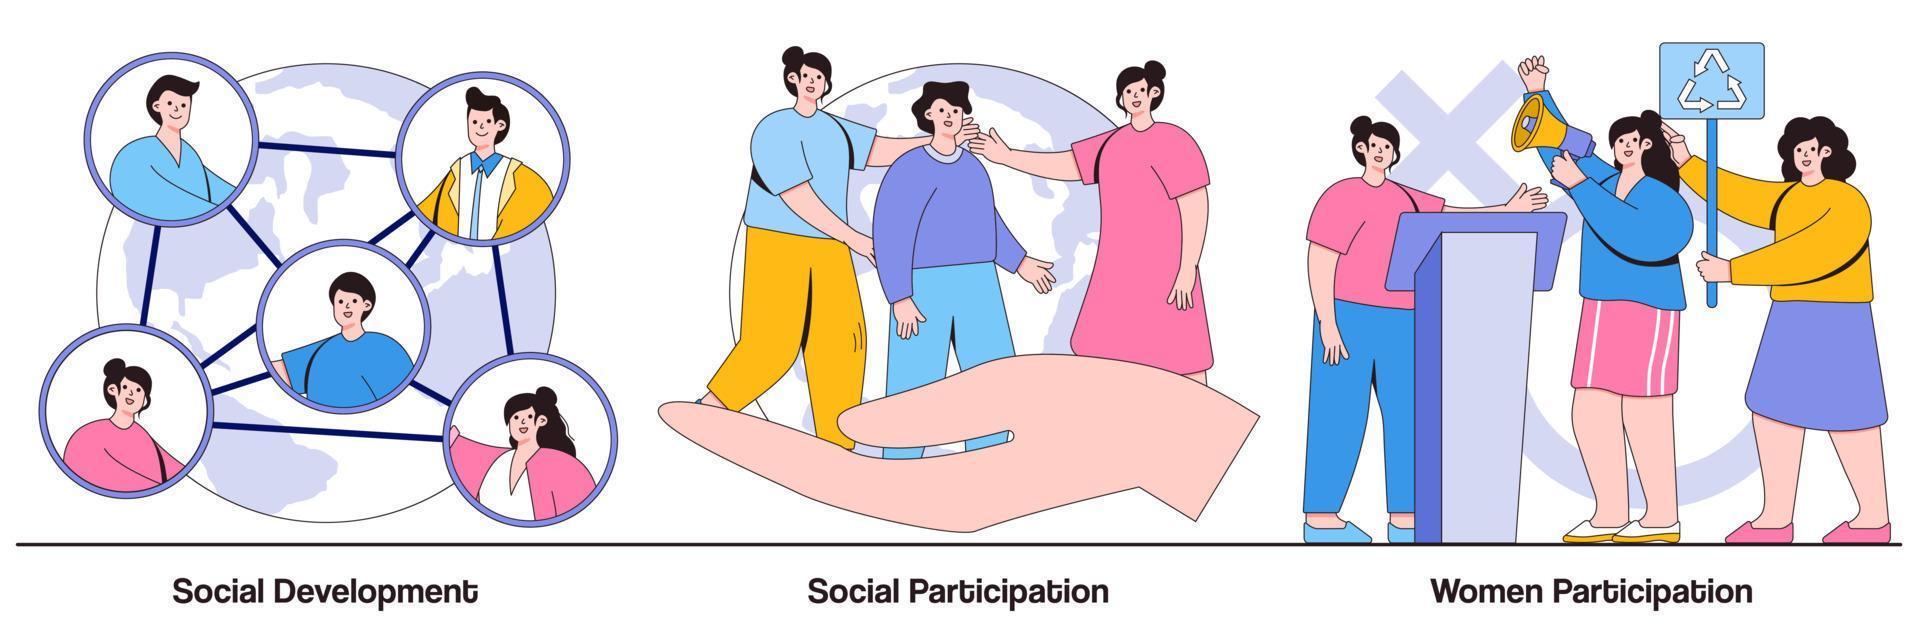 Social Development and Participation, Women Participation Illustrated Pack vector